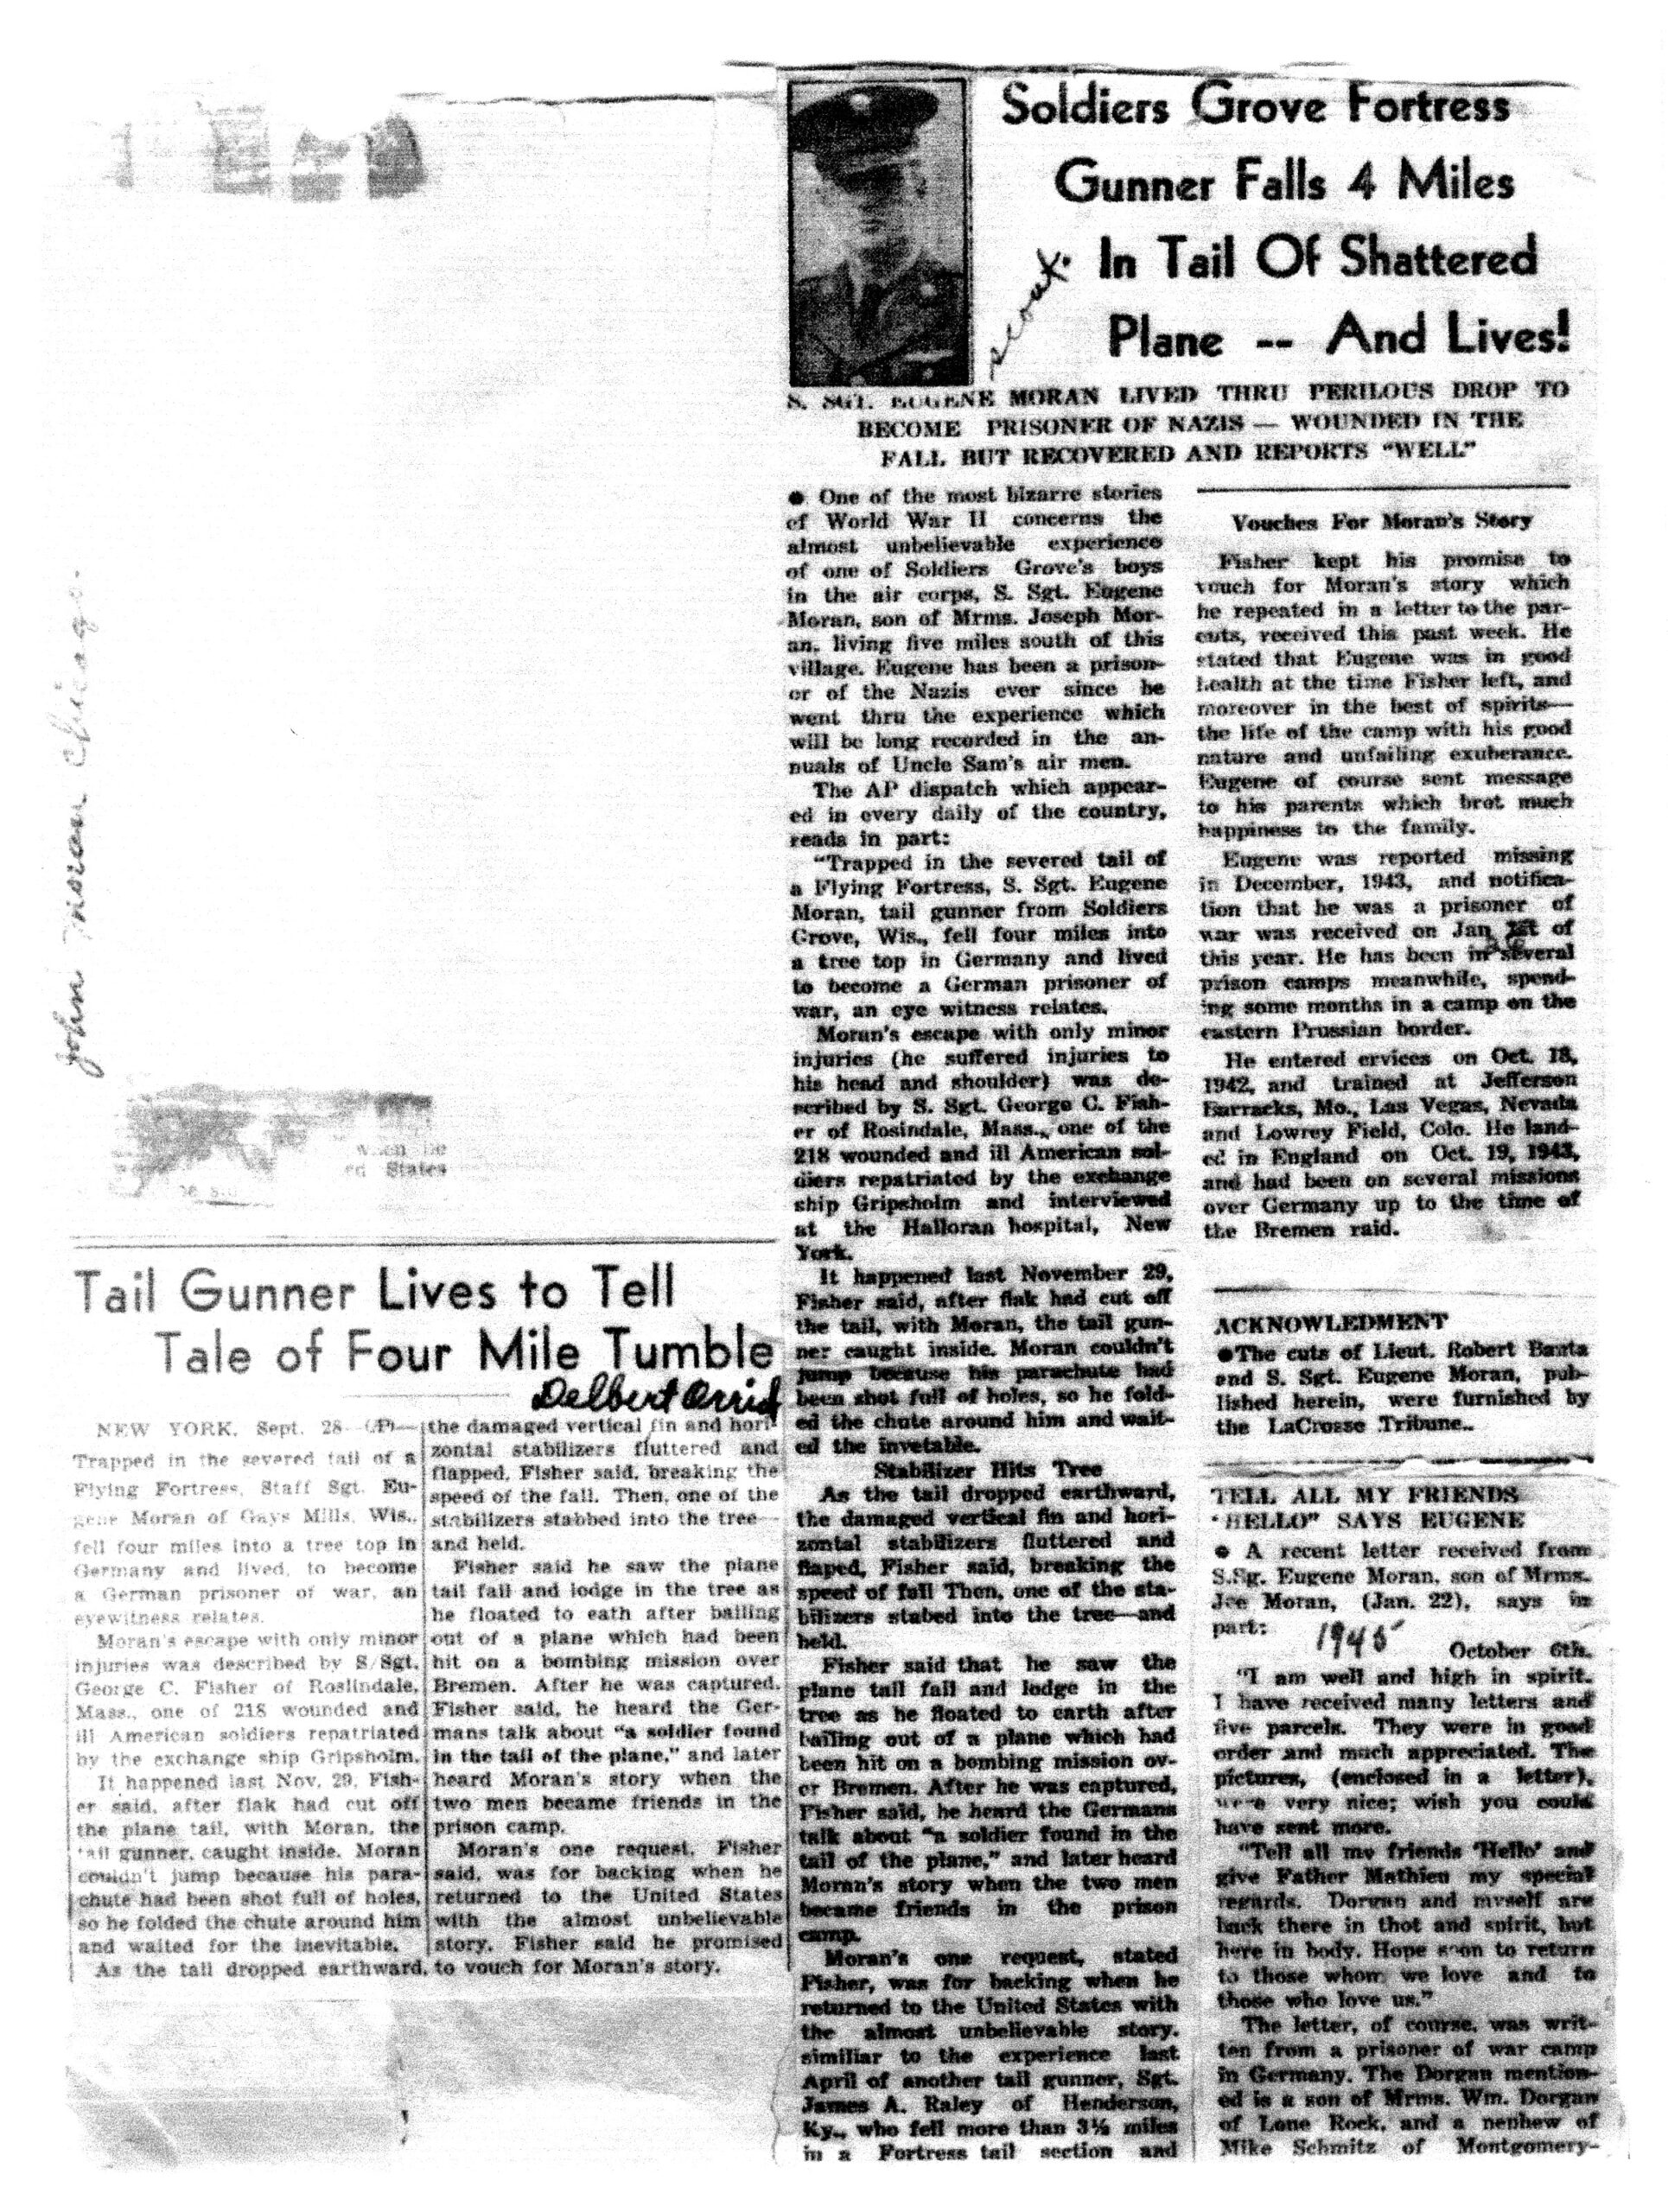 News clipping of SSGT Eugene Moran riding wreckage after being shot down